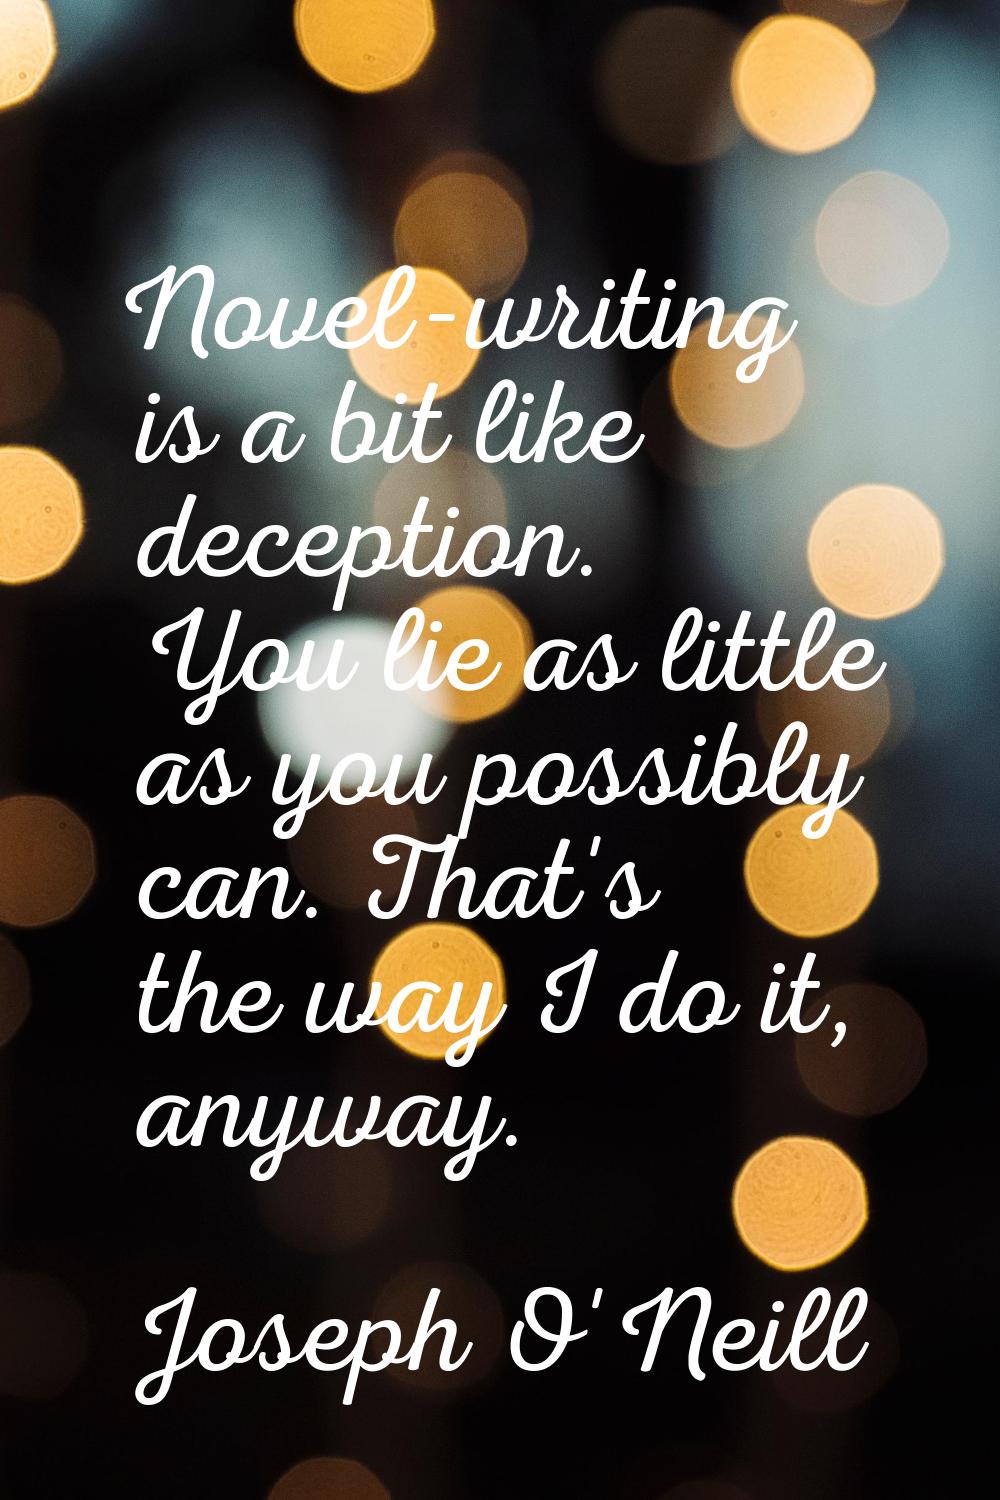 Novel-writing is a bit like deception. You lie as little as you possibly can. That's the way I do i